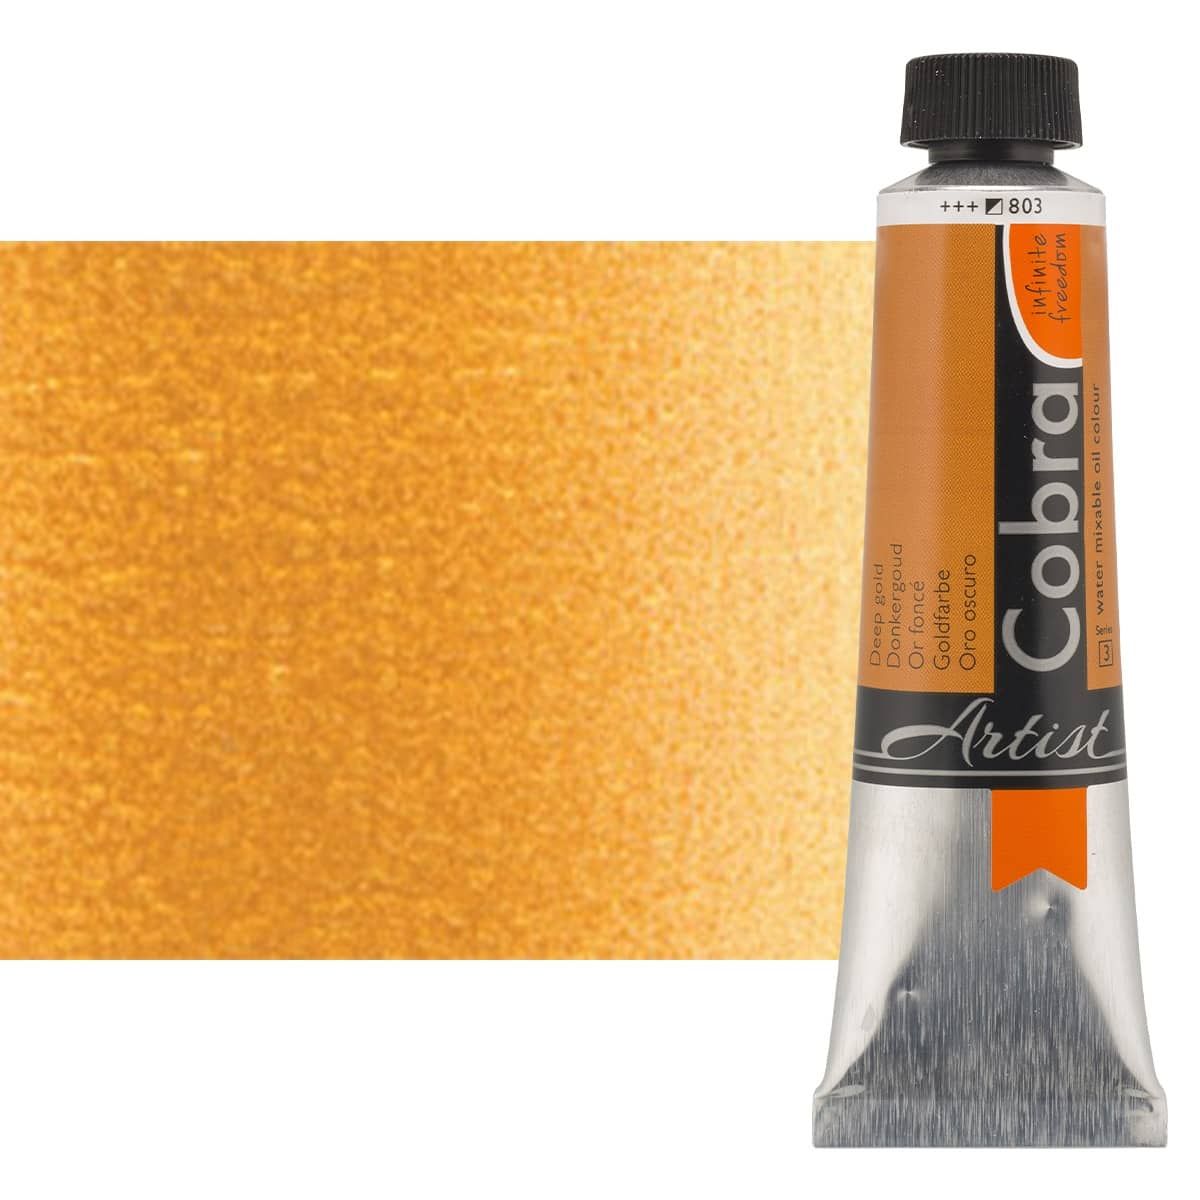 Cobra Water Mixable Oil Color 40ml Yellow Ochre